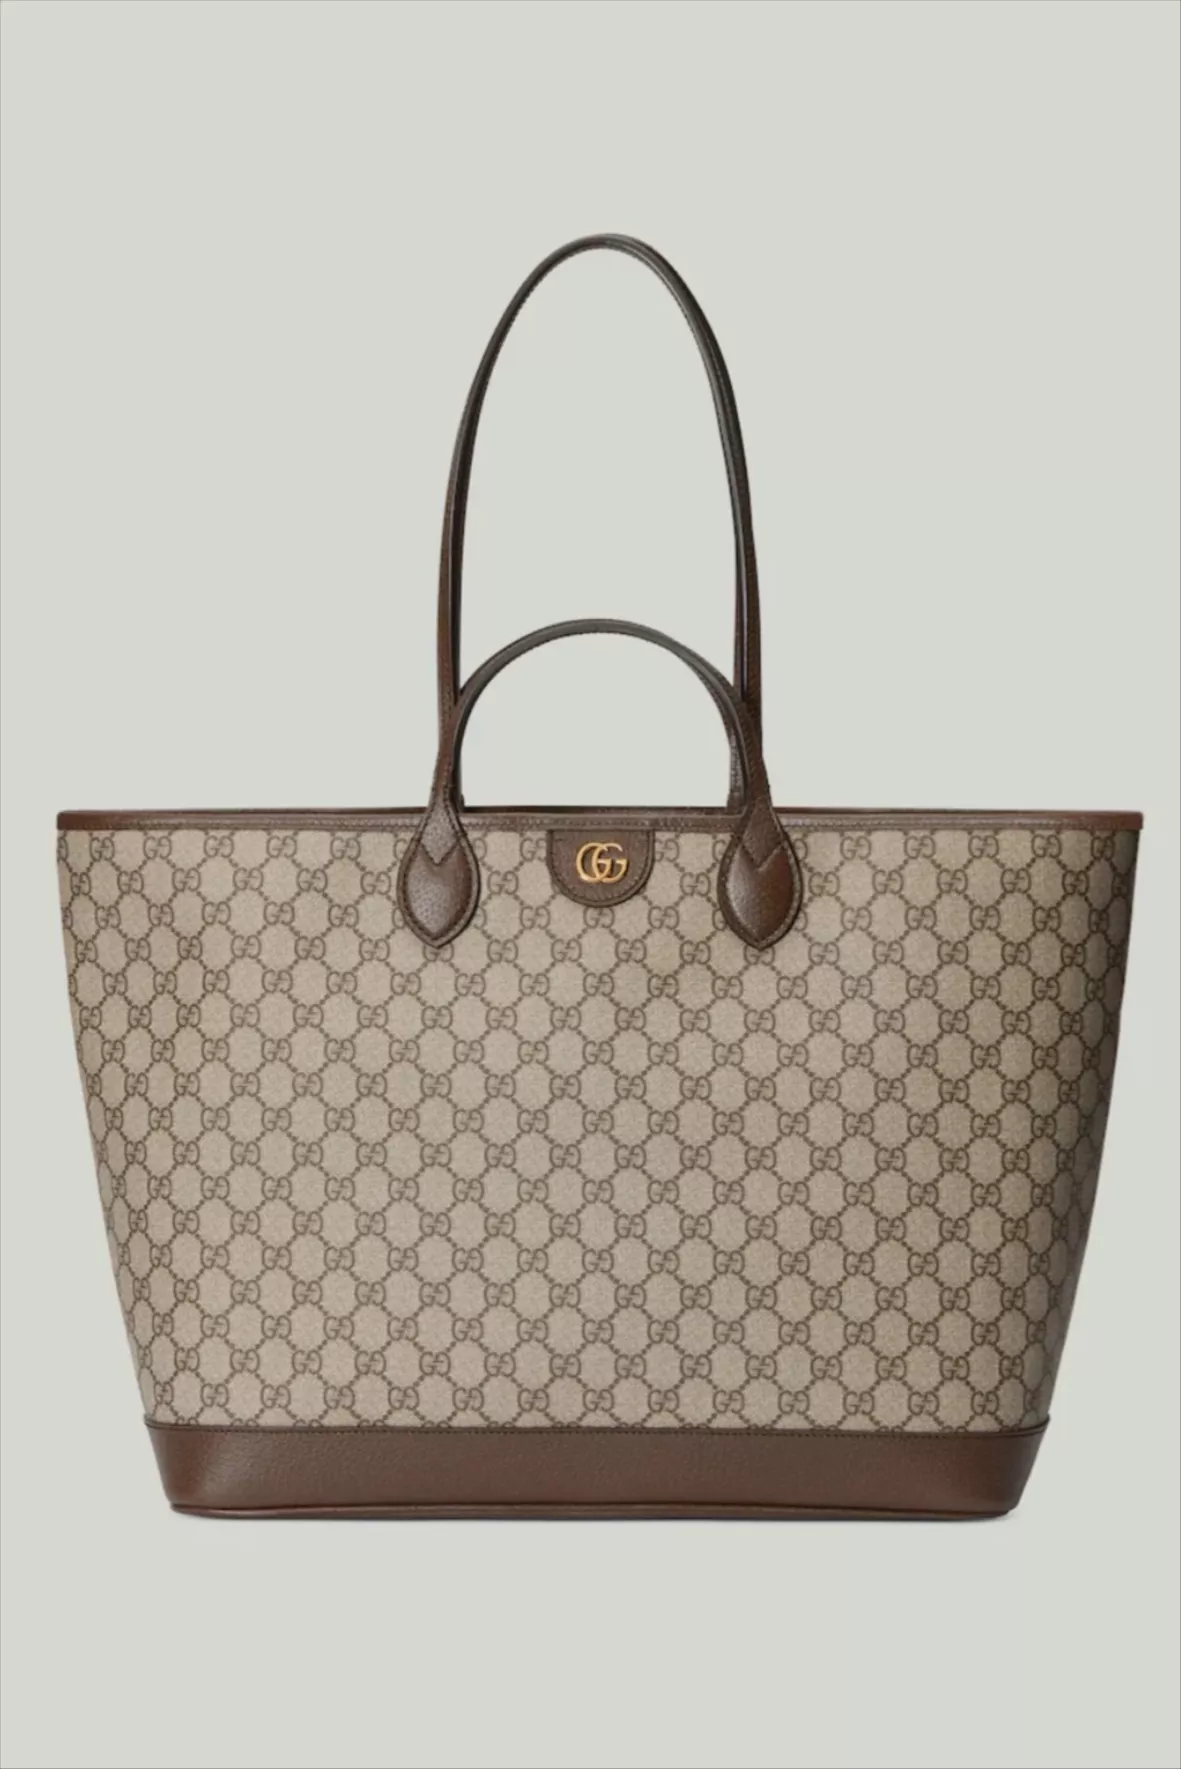 Gucci Marmont - GG Marmont Matelassé Large Tote in Black